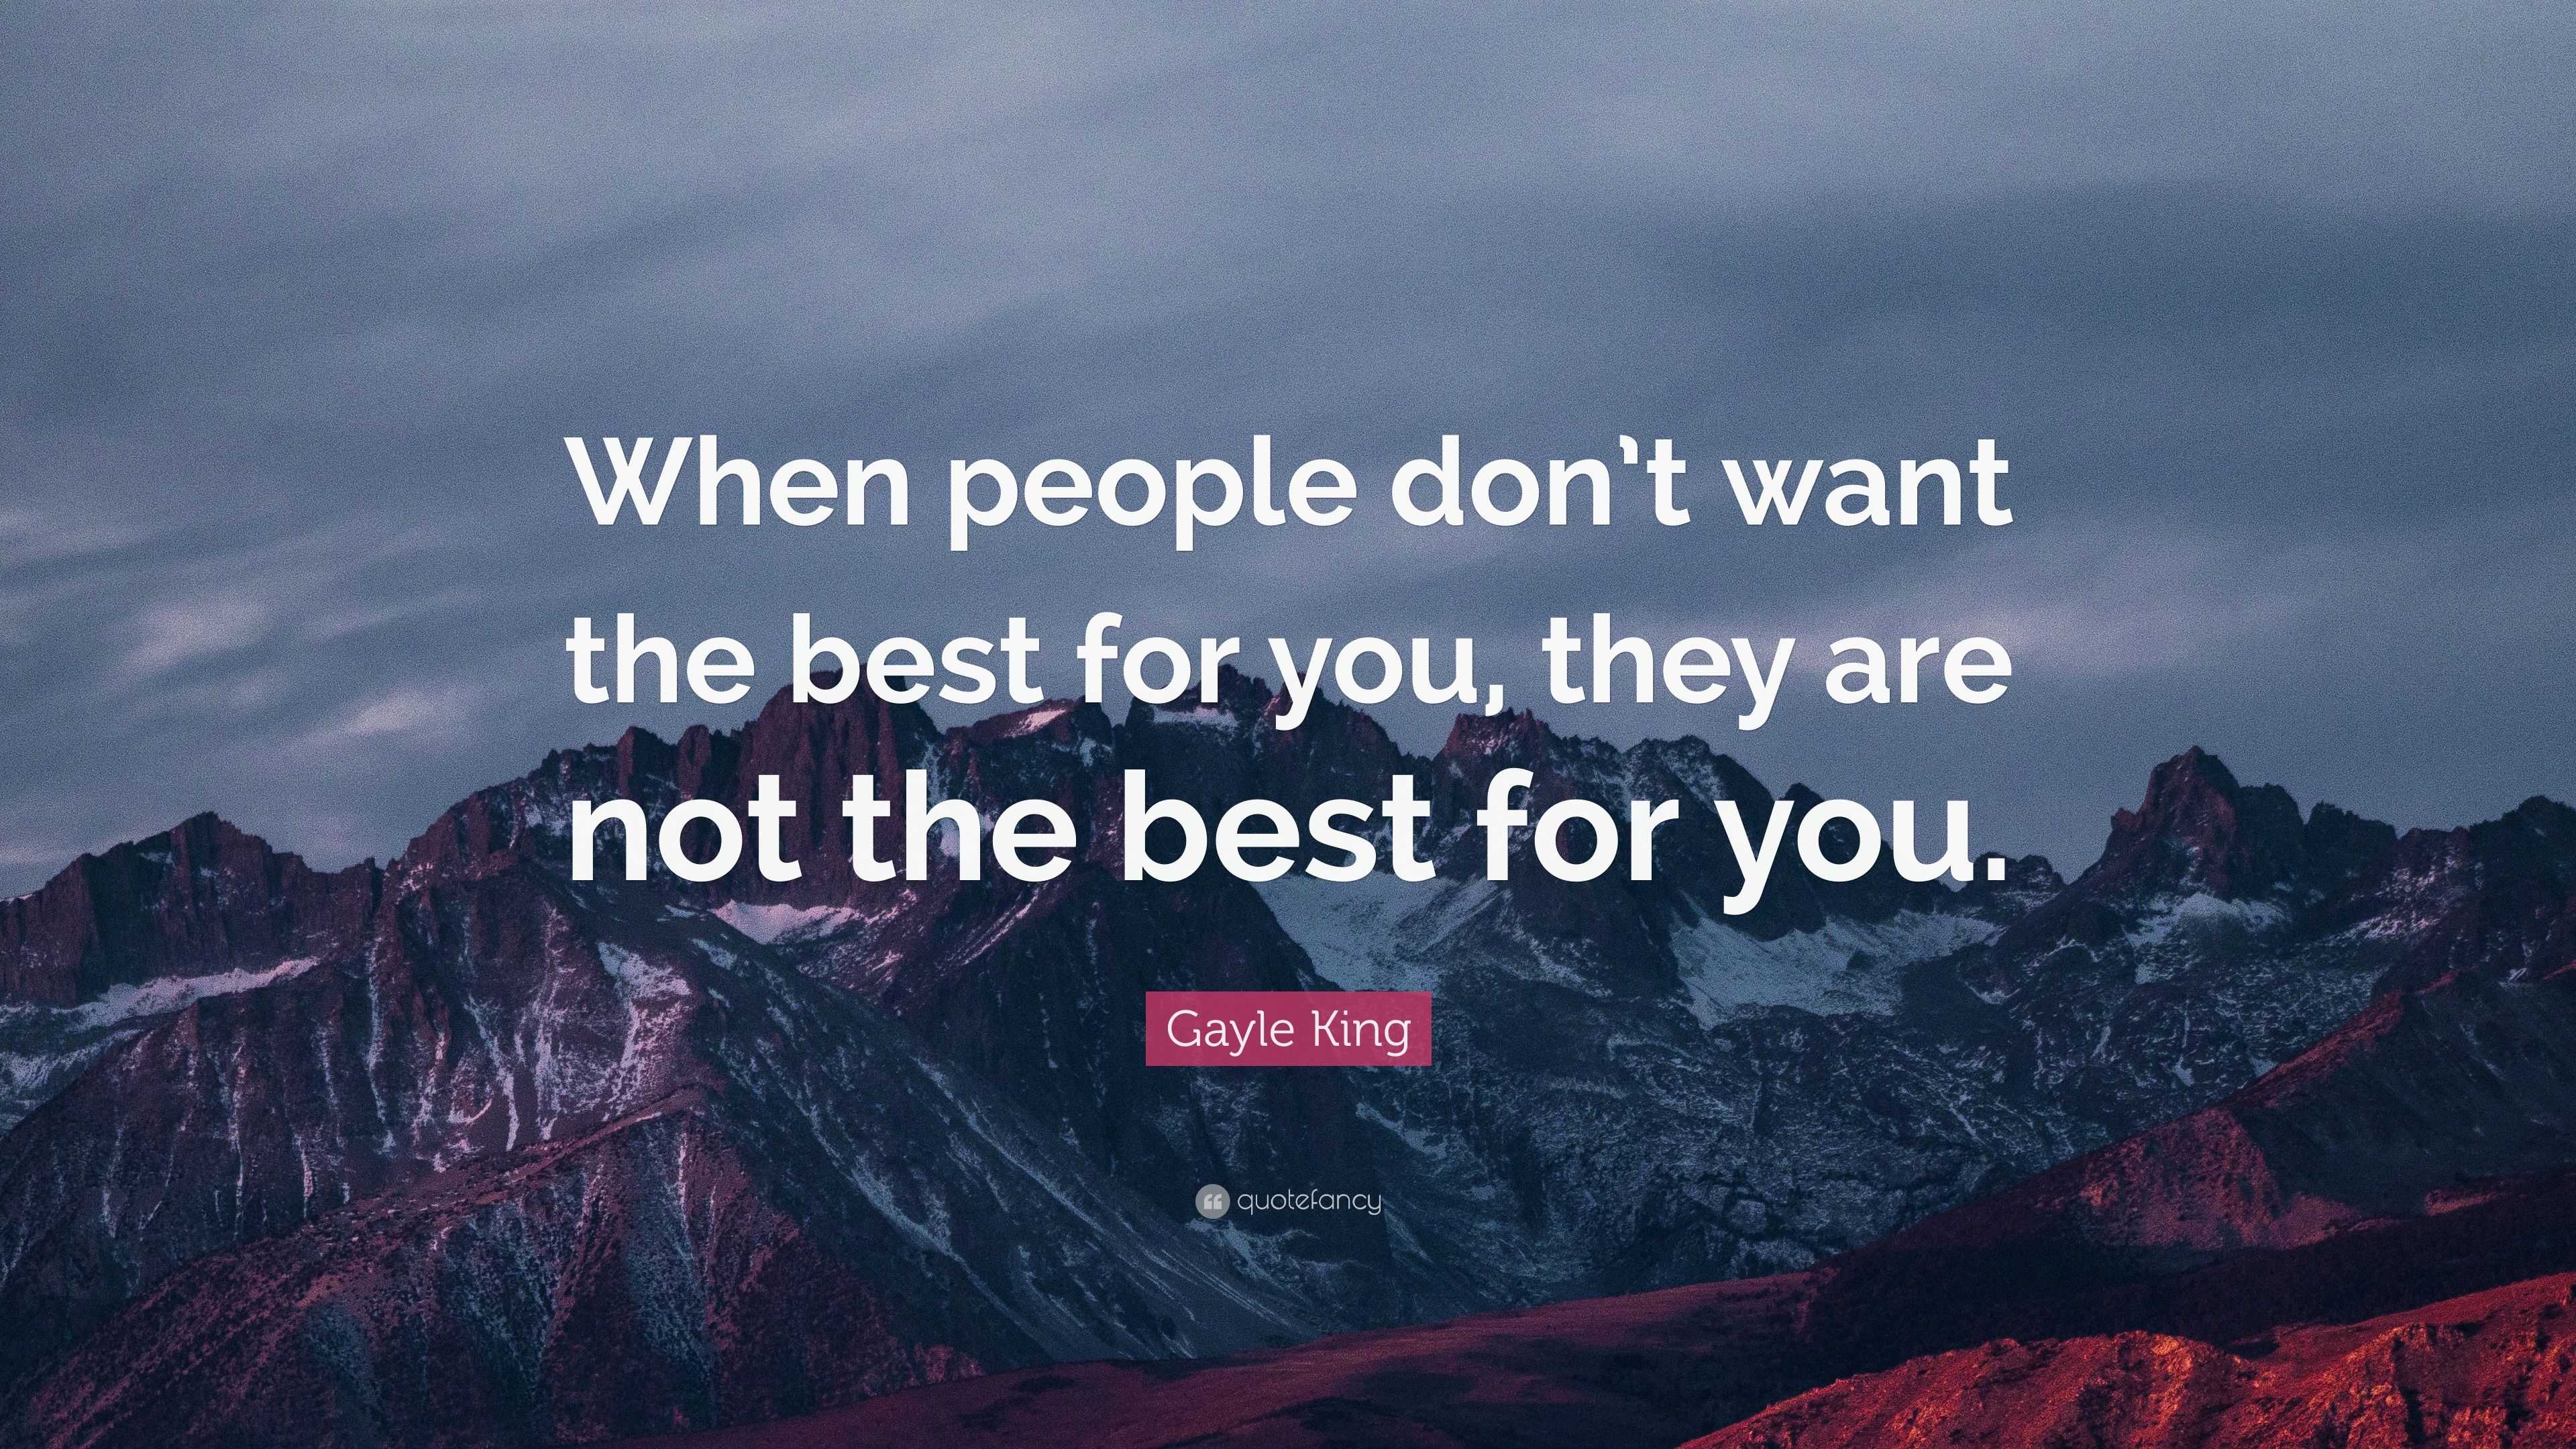 Gayle King Quote: “When people don’t want the best for you, they are ...